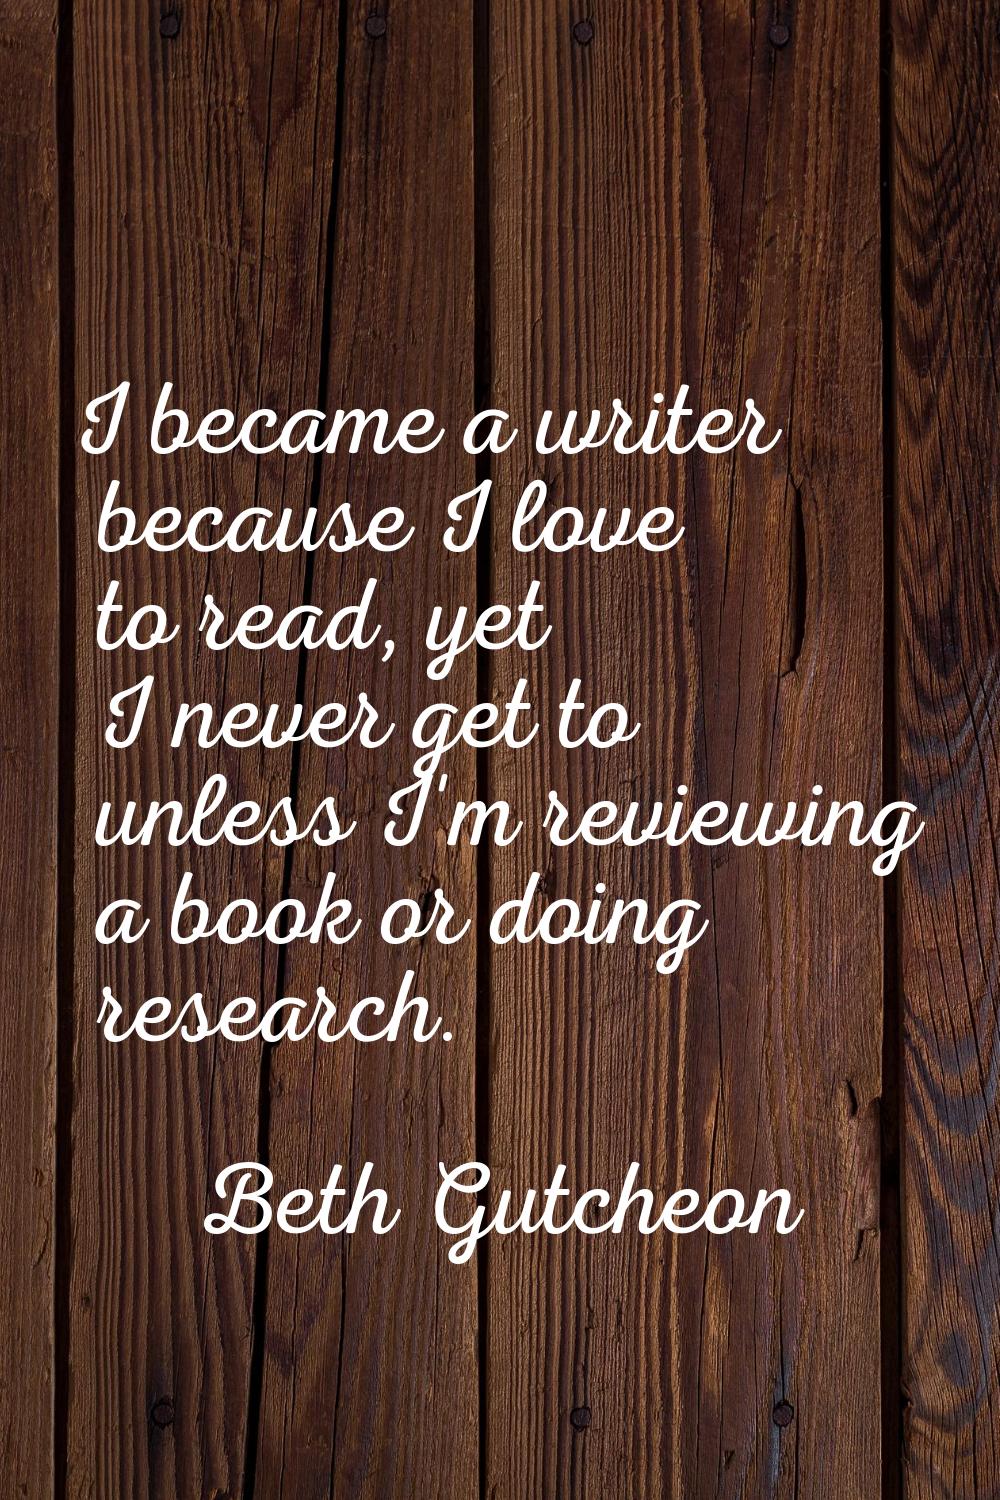 I became a writer because I love to read, yet I never get to unless I'm reviewing a book or doing r